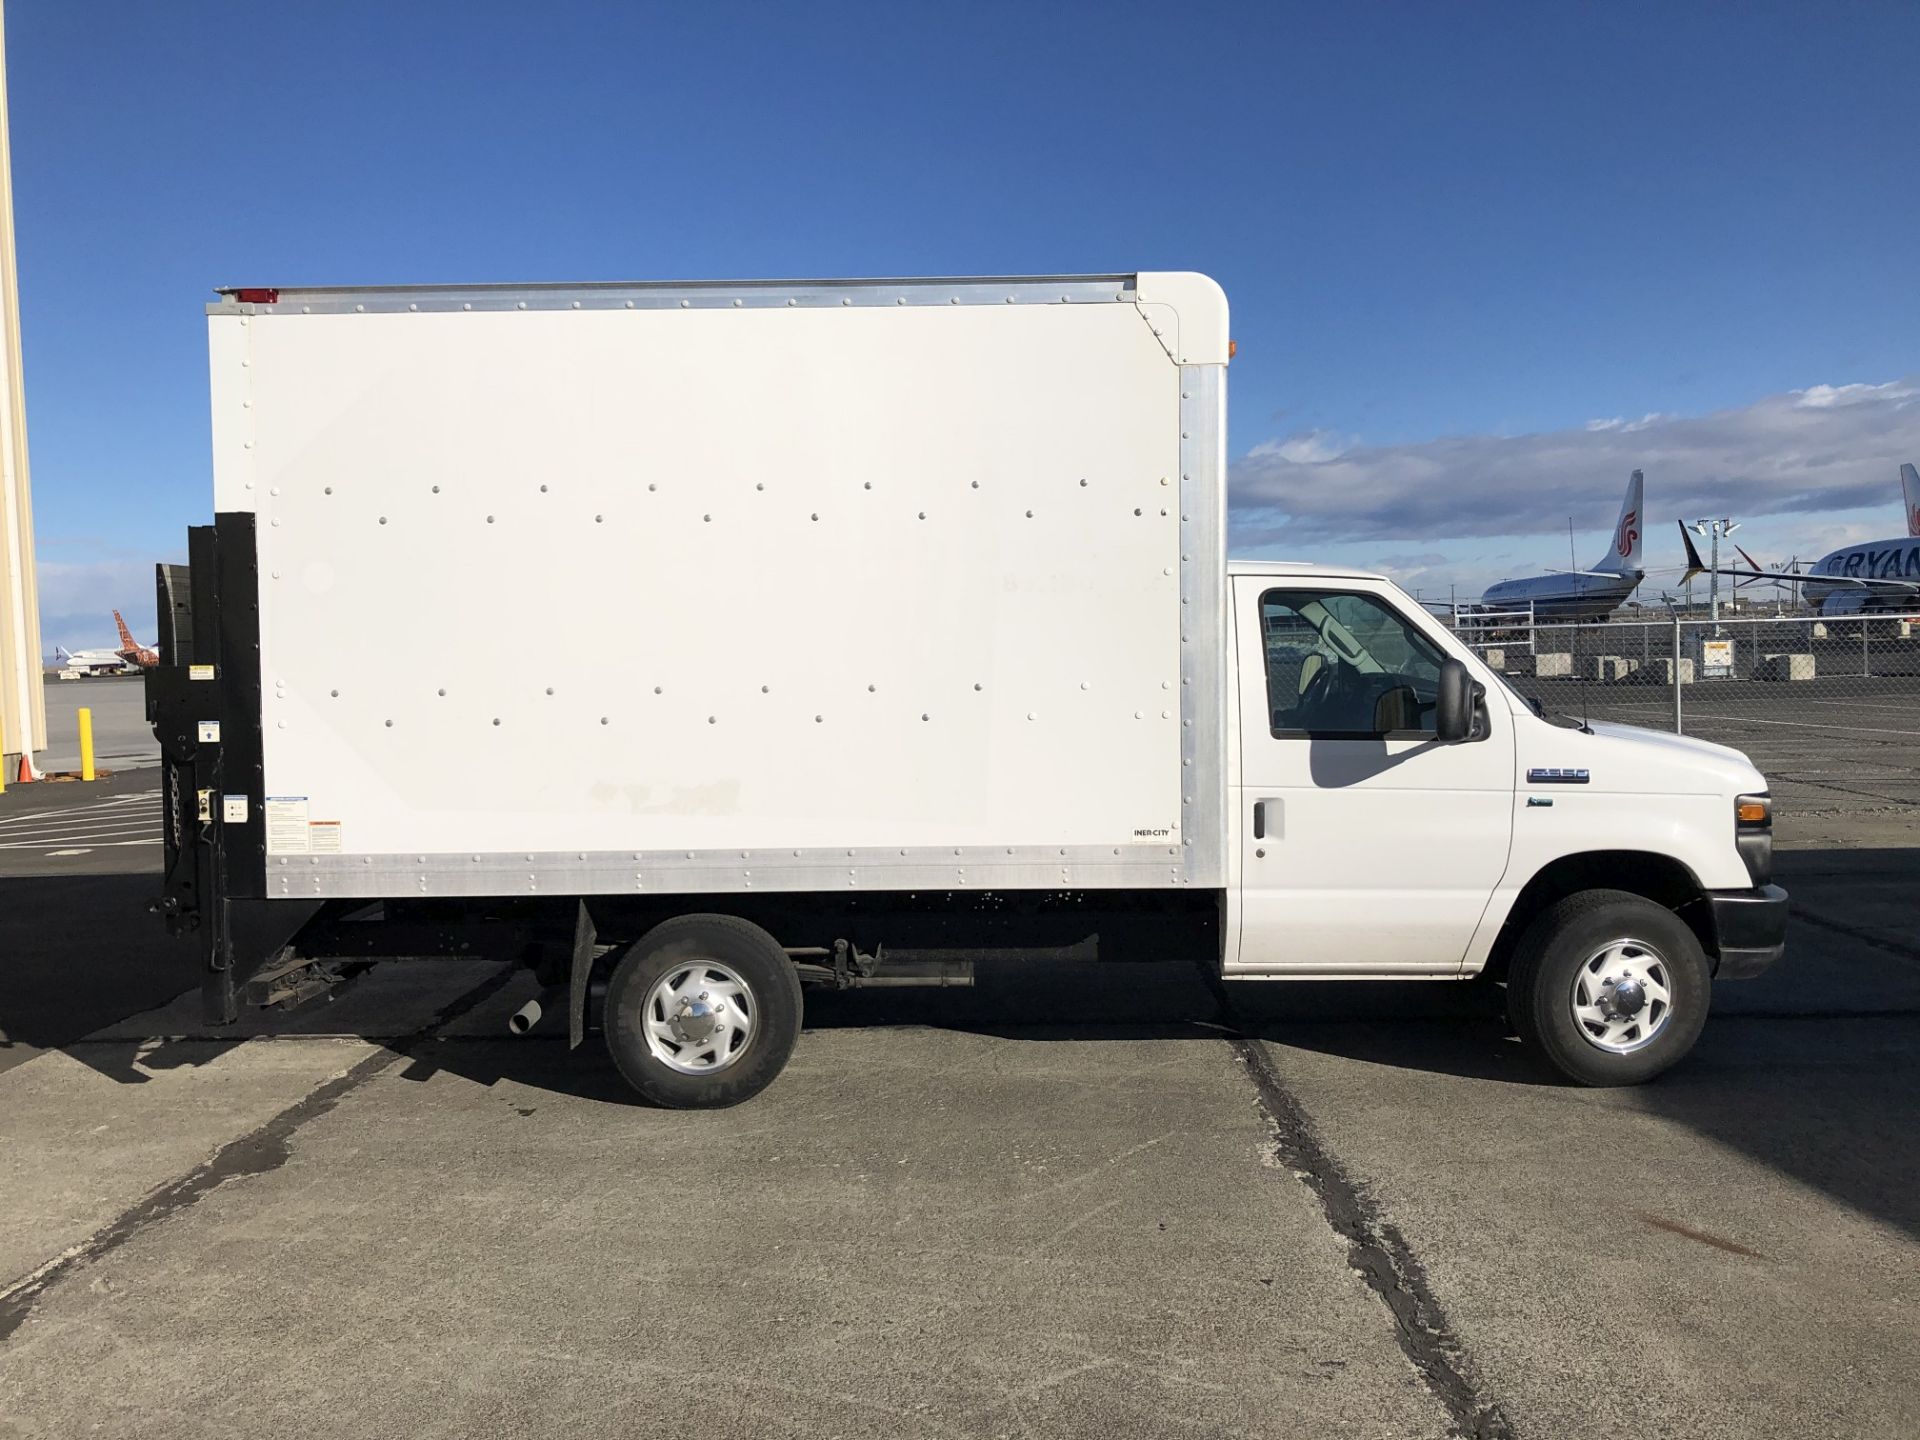 Late Delivery 4/9 - 2012 Ford E350 Super Duty 12' Box Truck w/ Lift Gate - Image 4 of 13